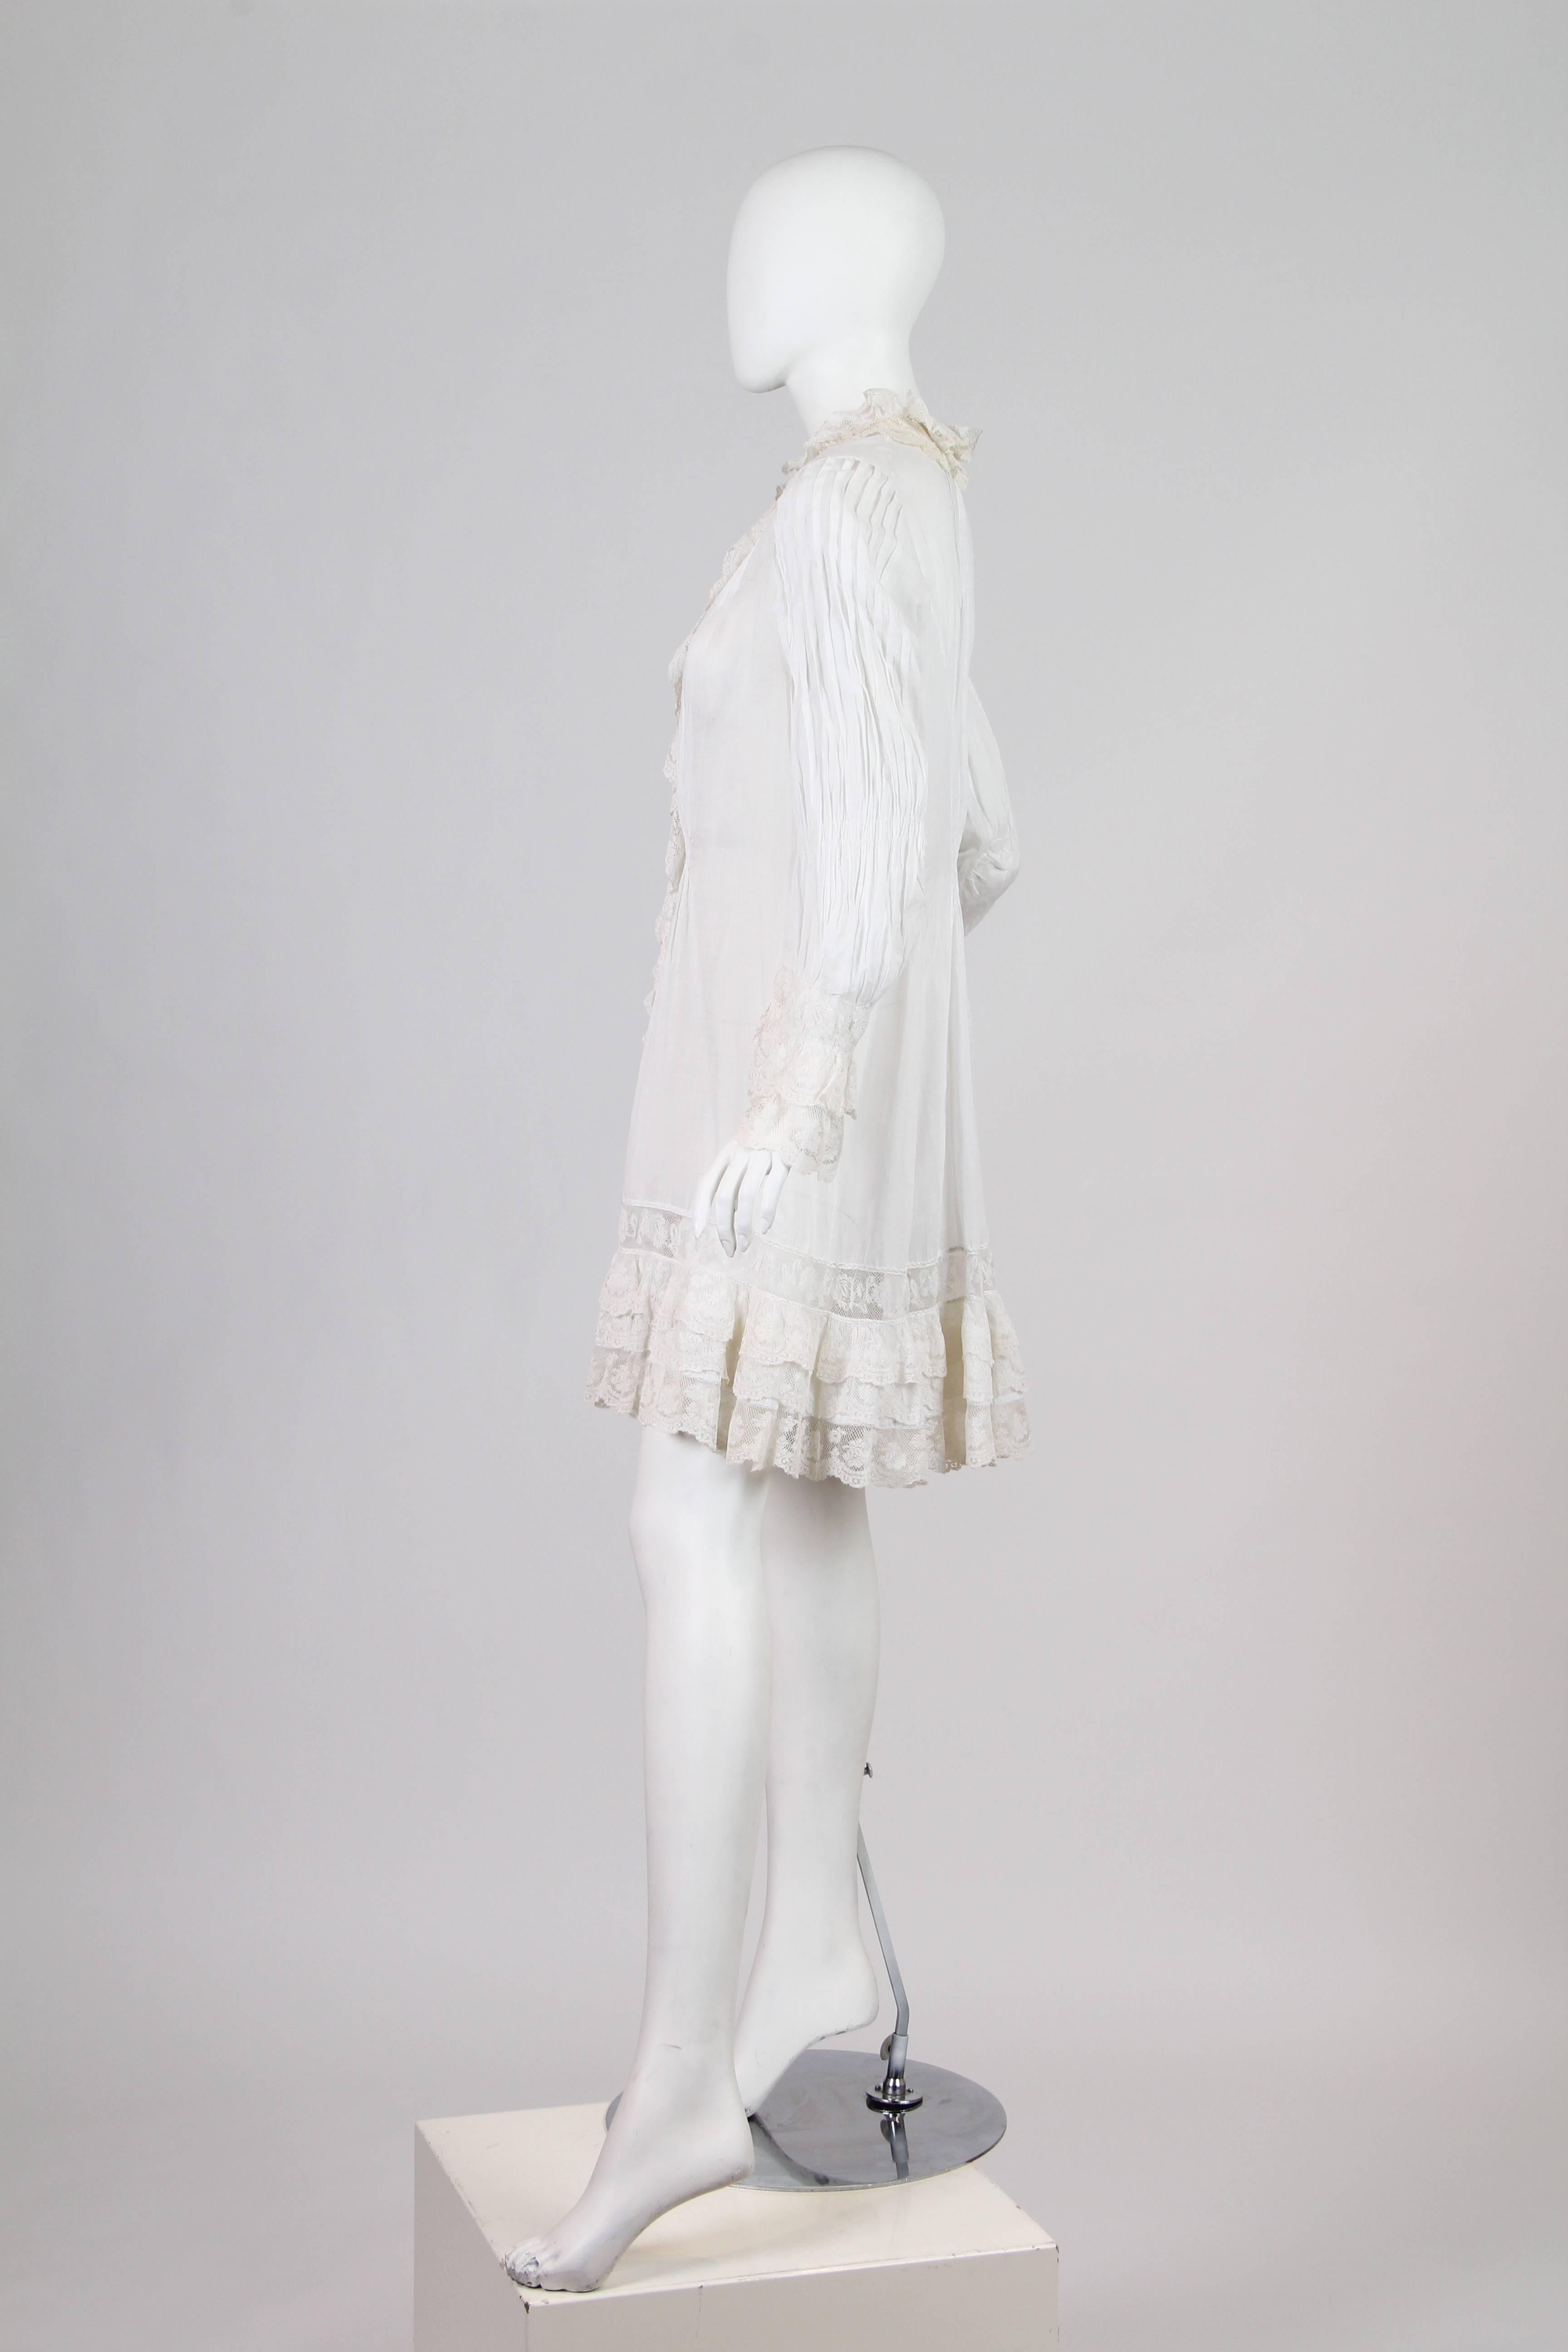 Women's 1870-80 Hand Pintucked Cotton and Lace Jacket